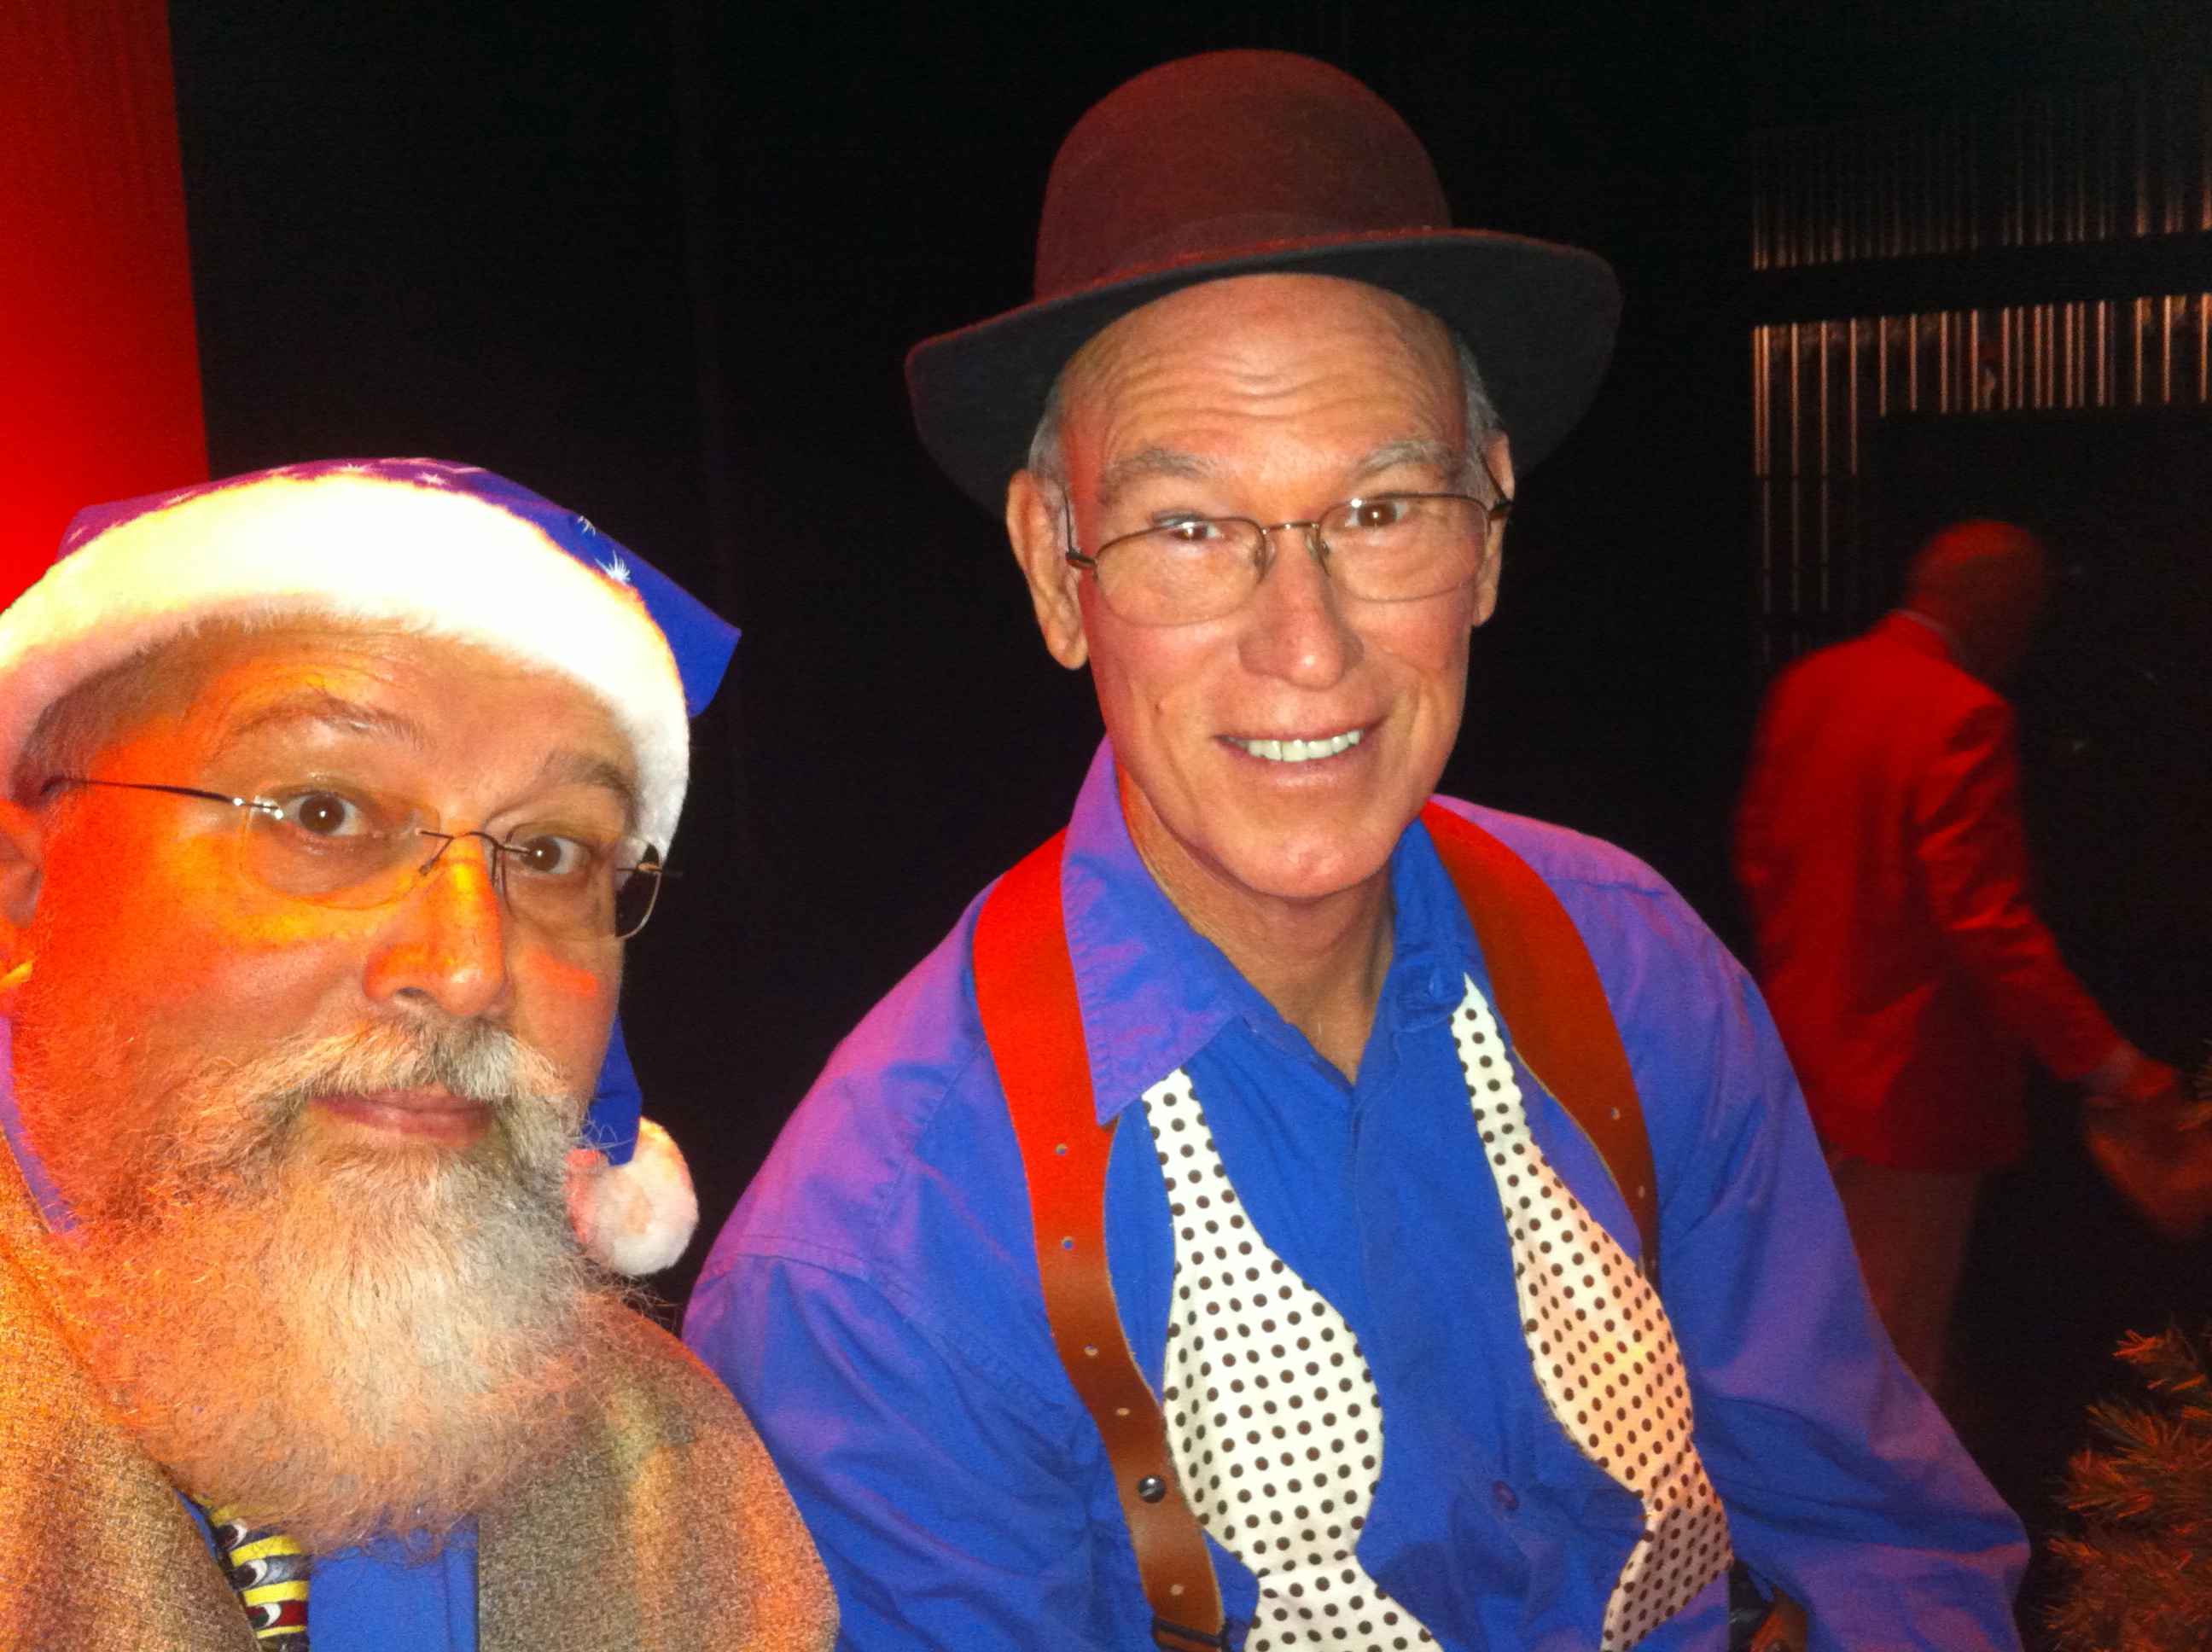 Marty and I at Herald's Christmas Show on December 10, 2011